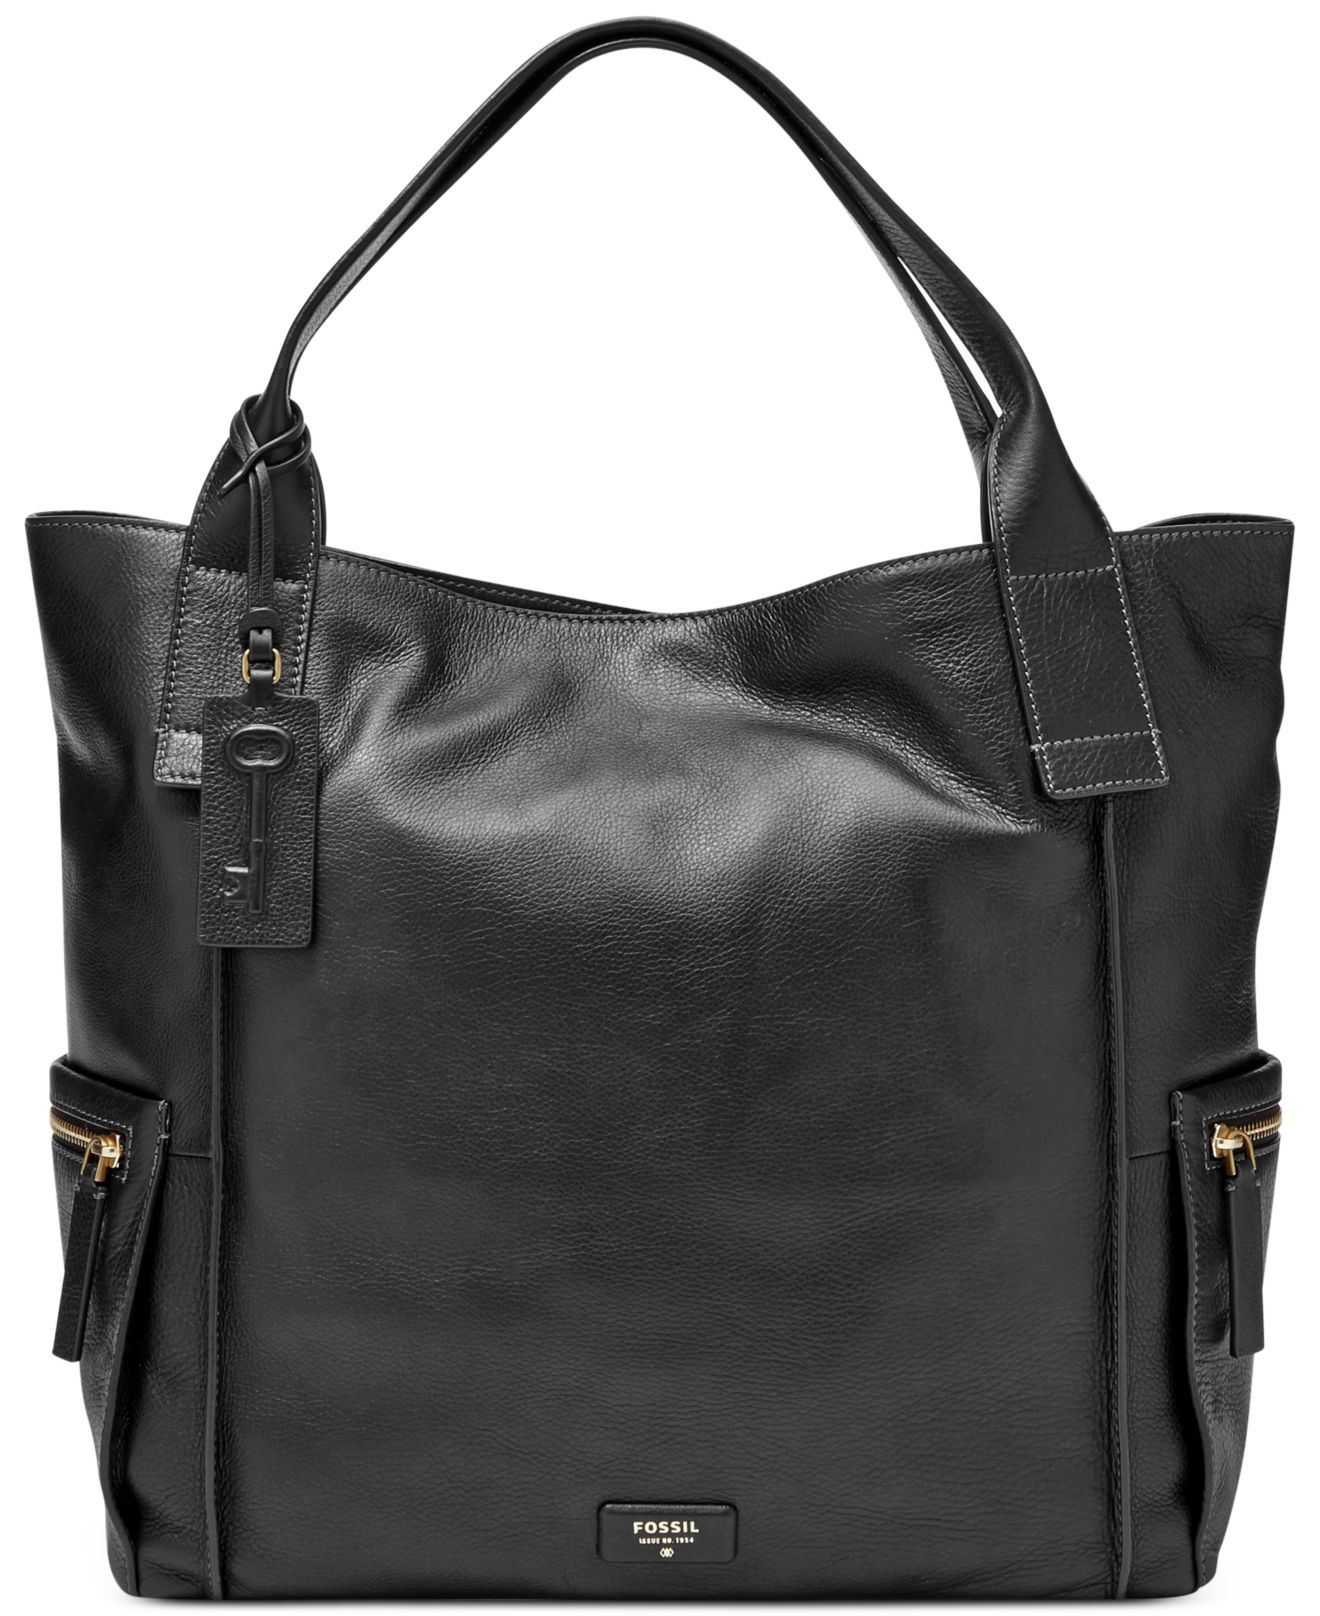 Fossil Emerson Leather Tote in Black | Lyst